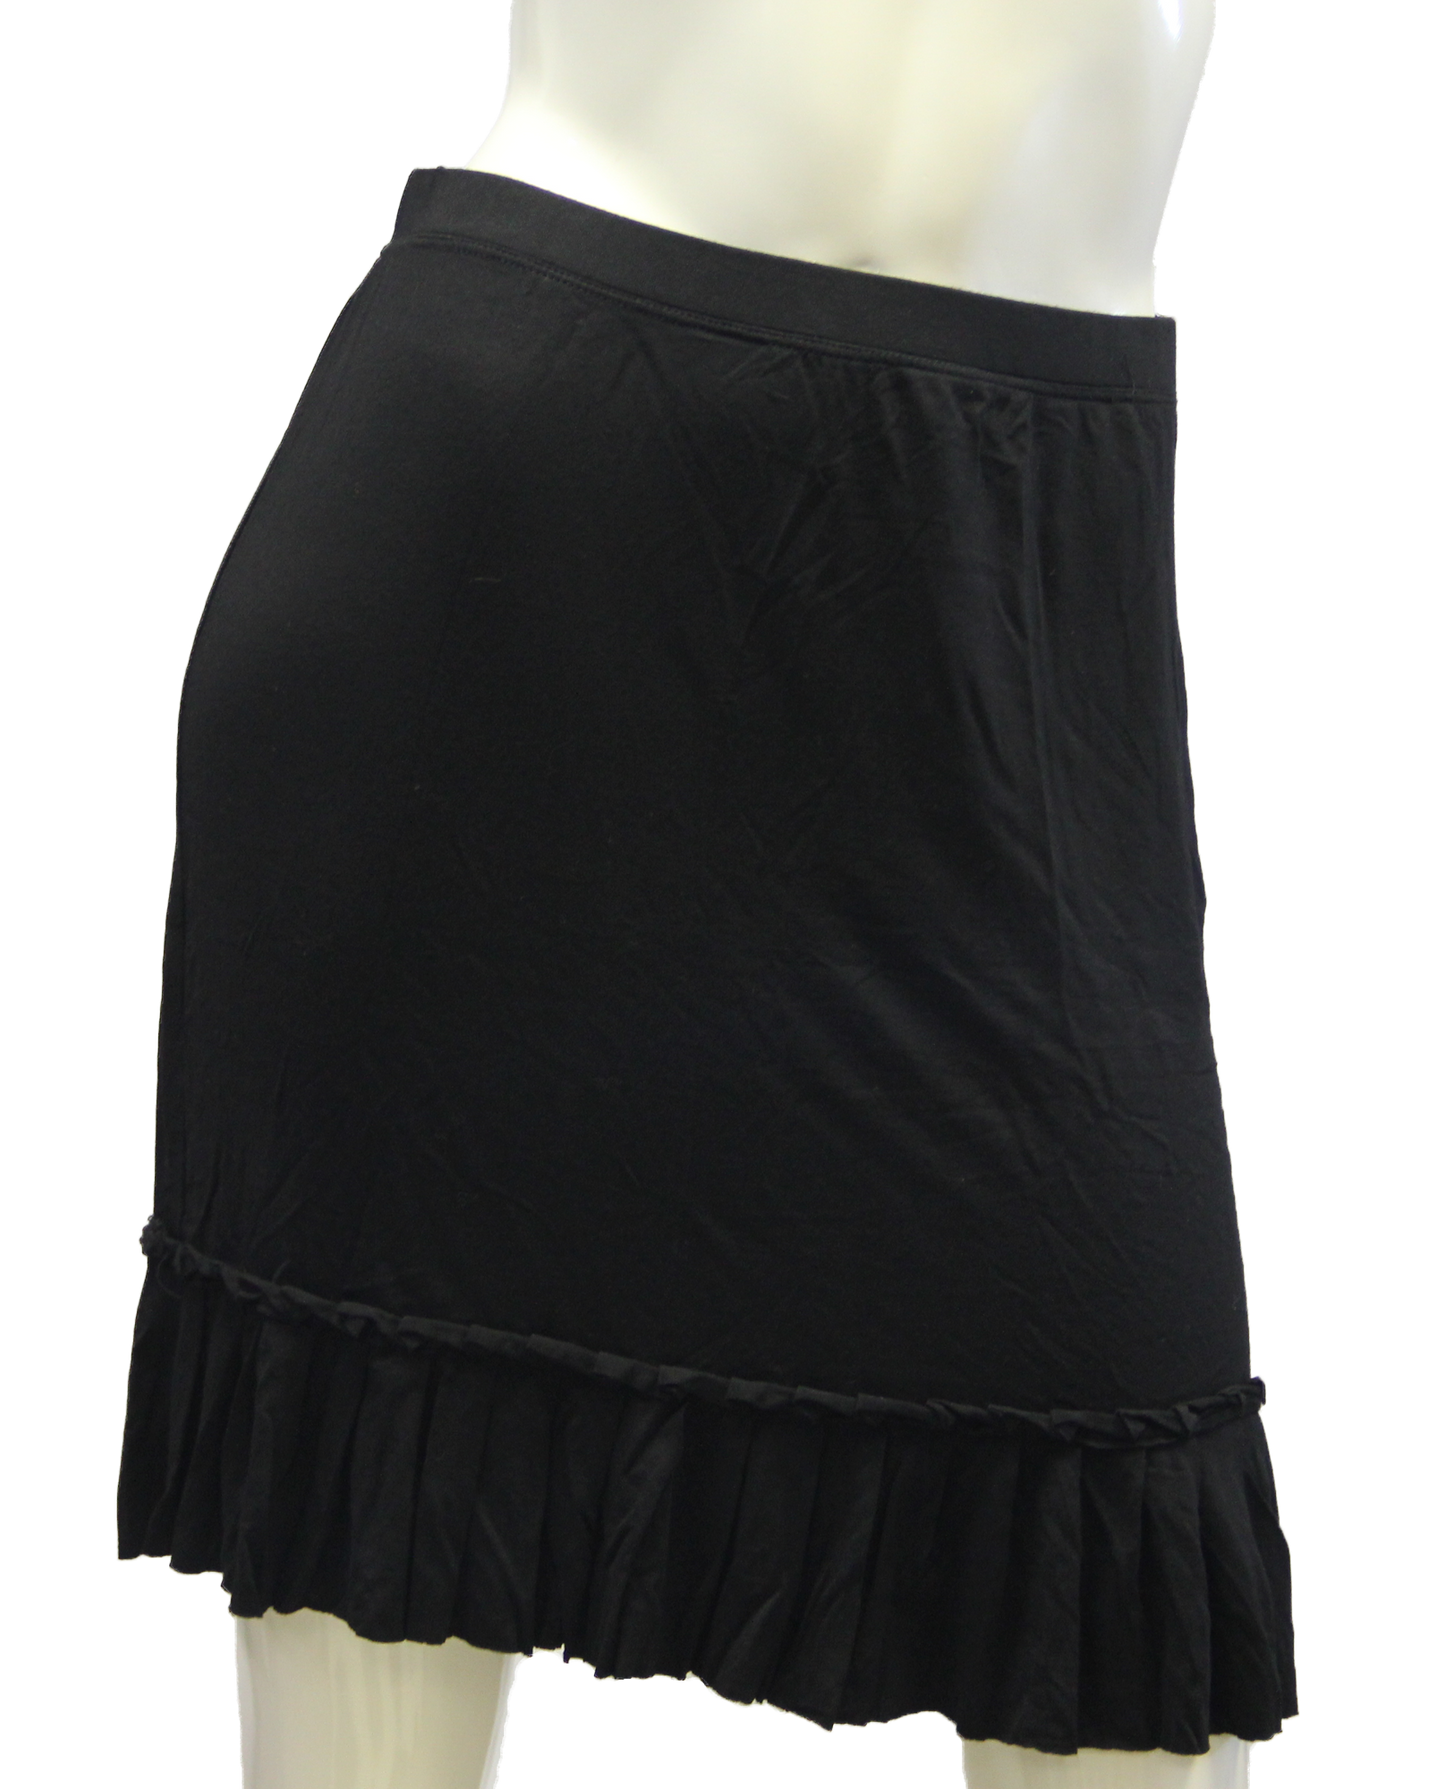 Load image into Gallery viewer, Max Studio Black Skirt with Ruffle Bottom Size Small (SKU 000028) - Designers On A Dime - 1
